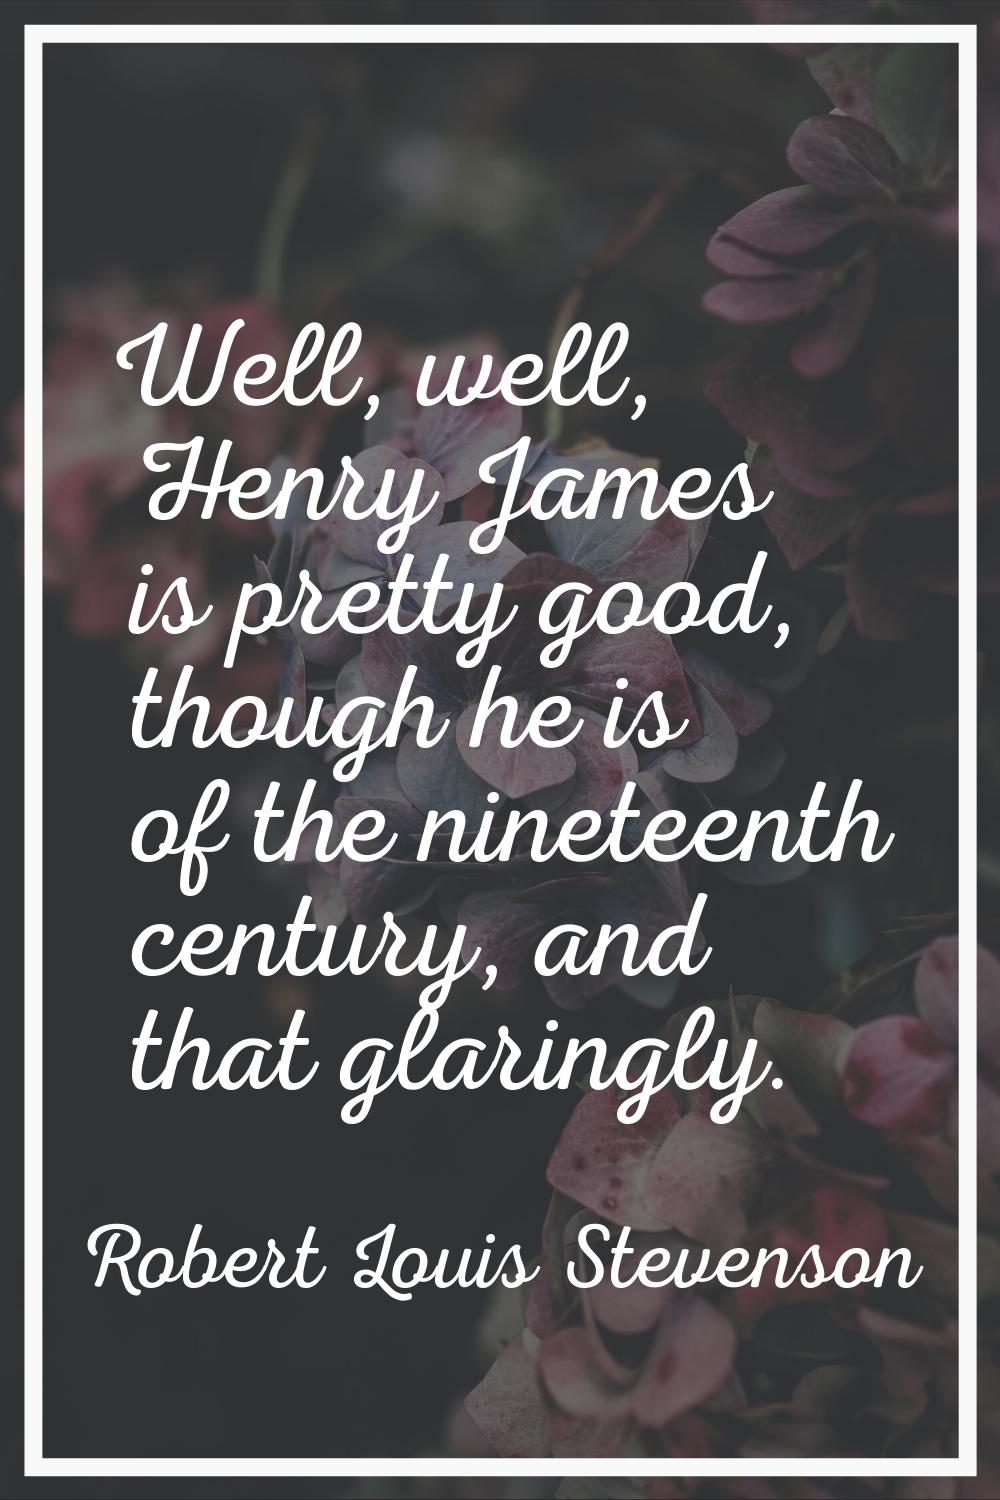 Well, well, Henry James is pretty good, though he is of the nineteenth century, and that glaringly.